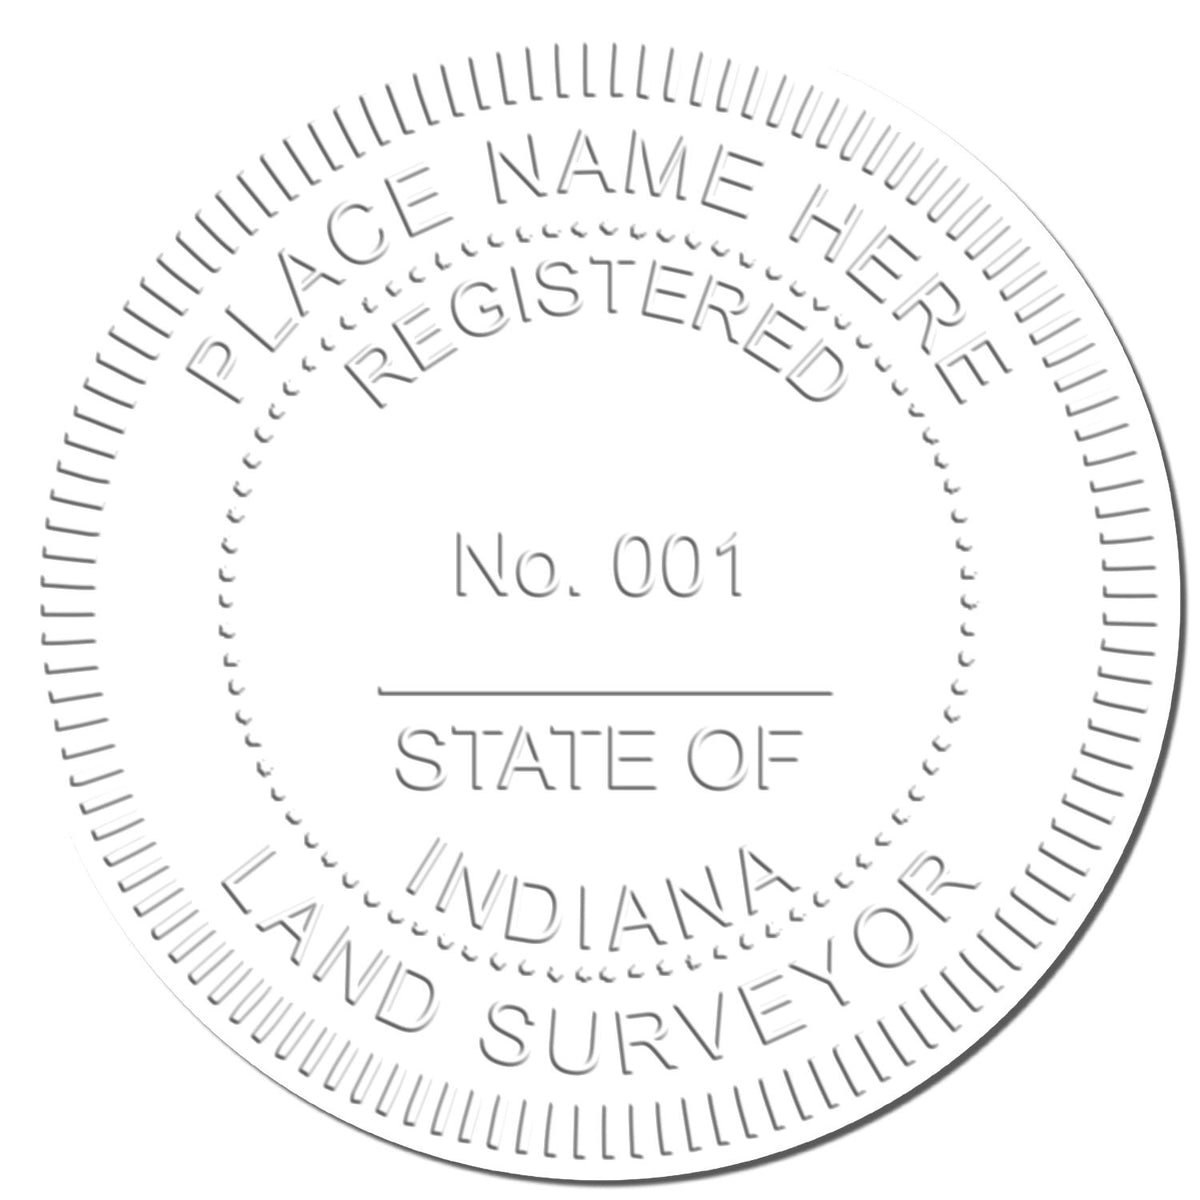 This paper is stamped with a sample imprint of the Gift Indiana Land Surveyor Seal, signifying its quality and reliability.